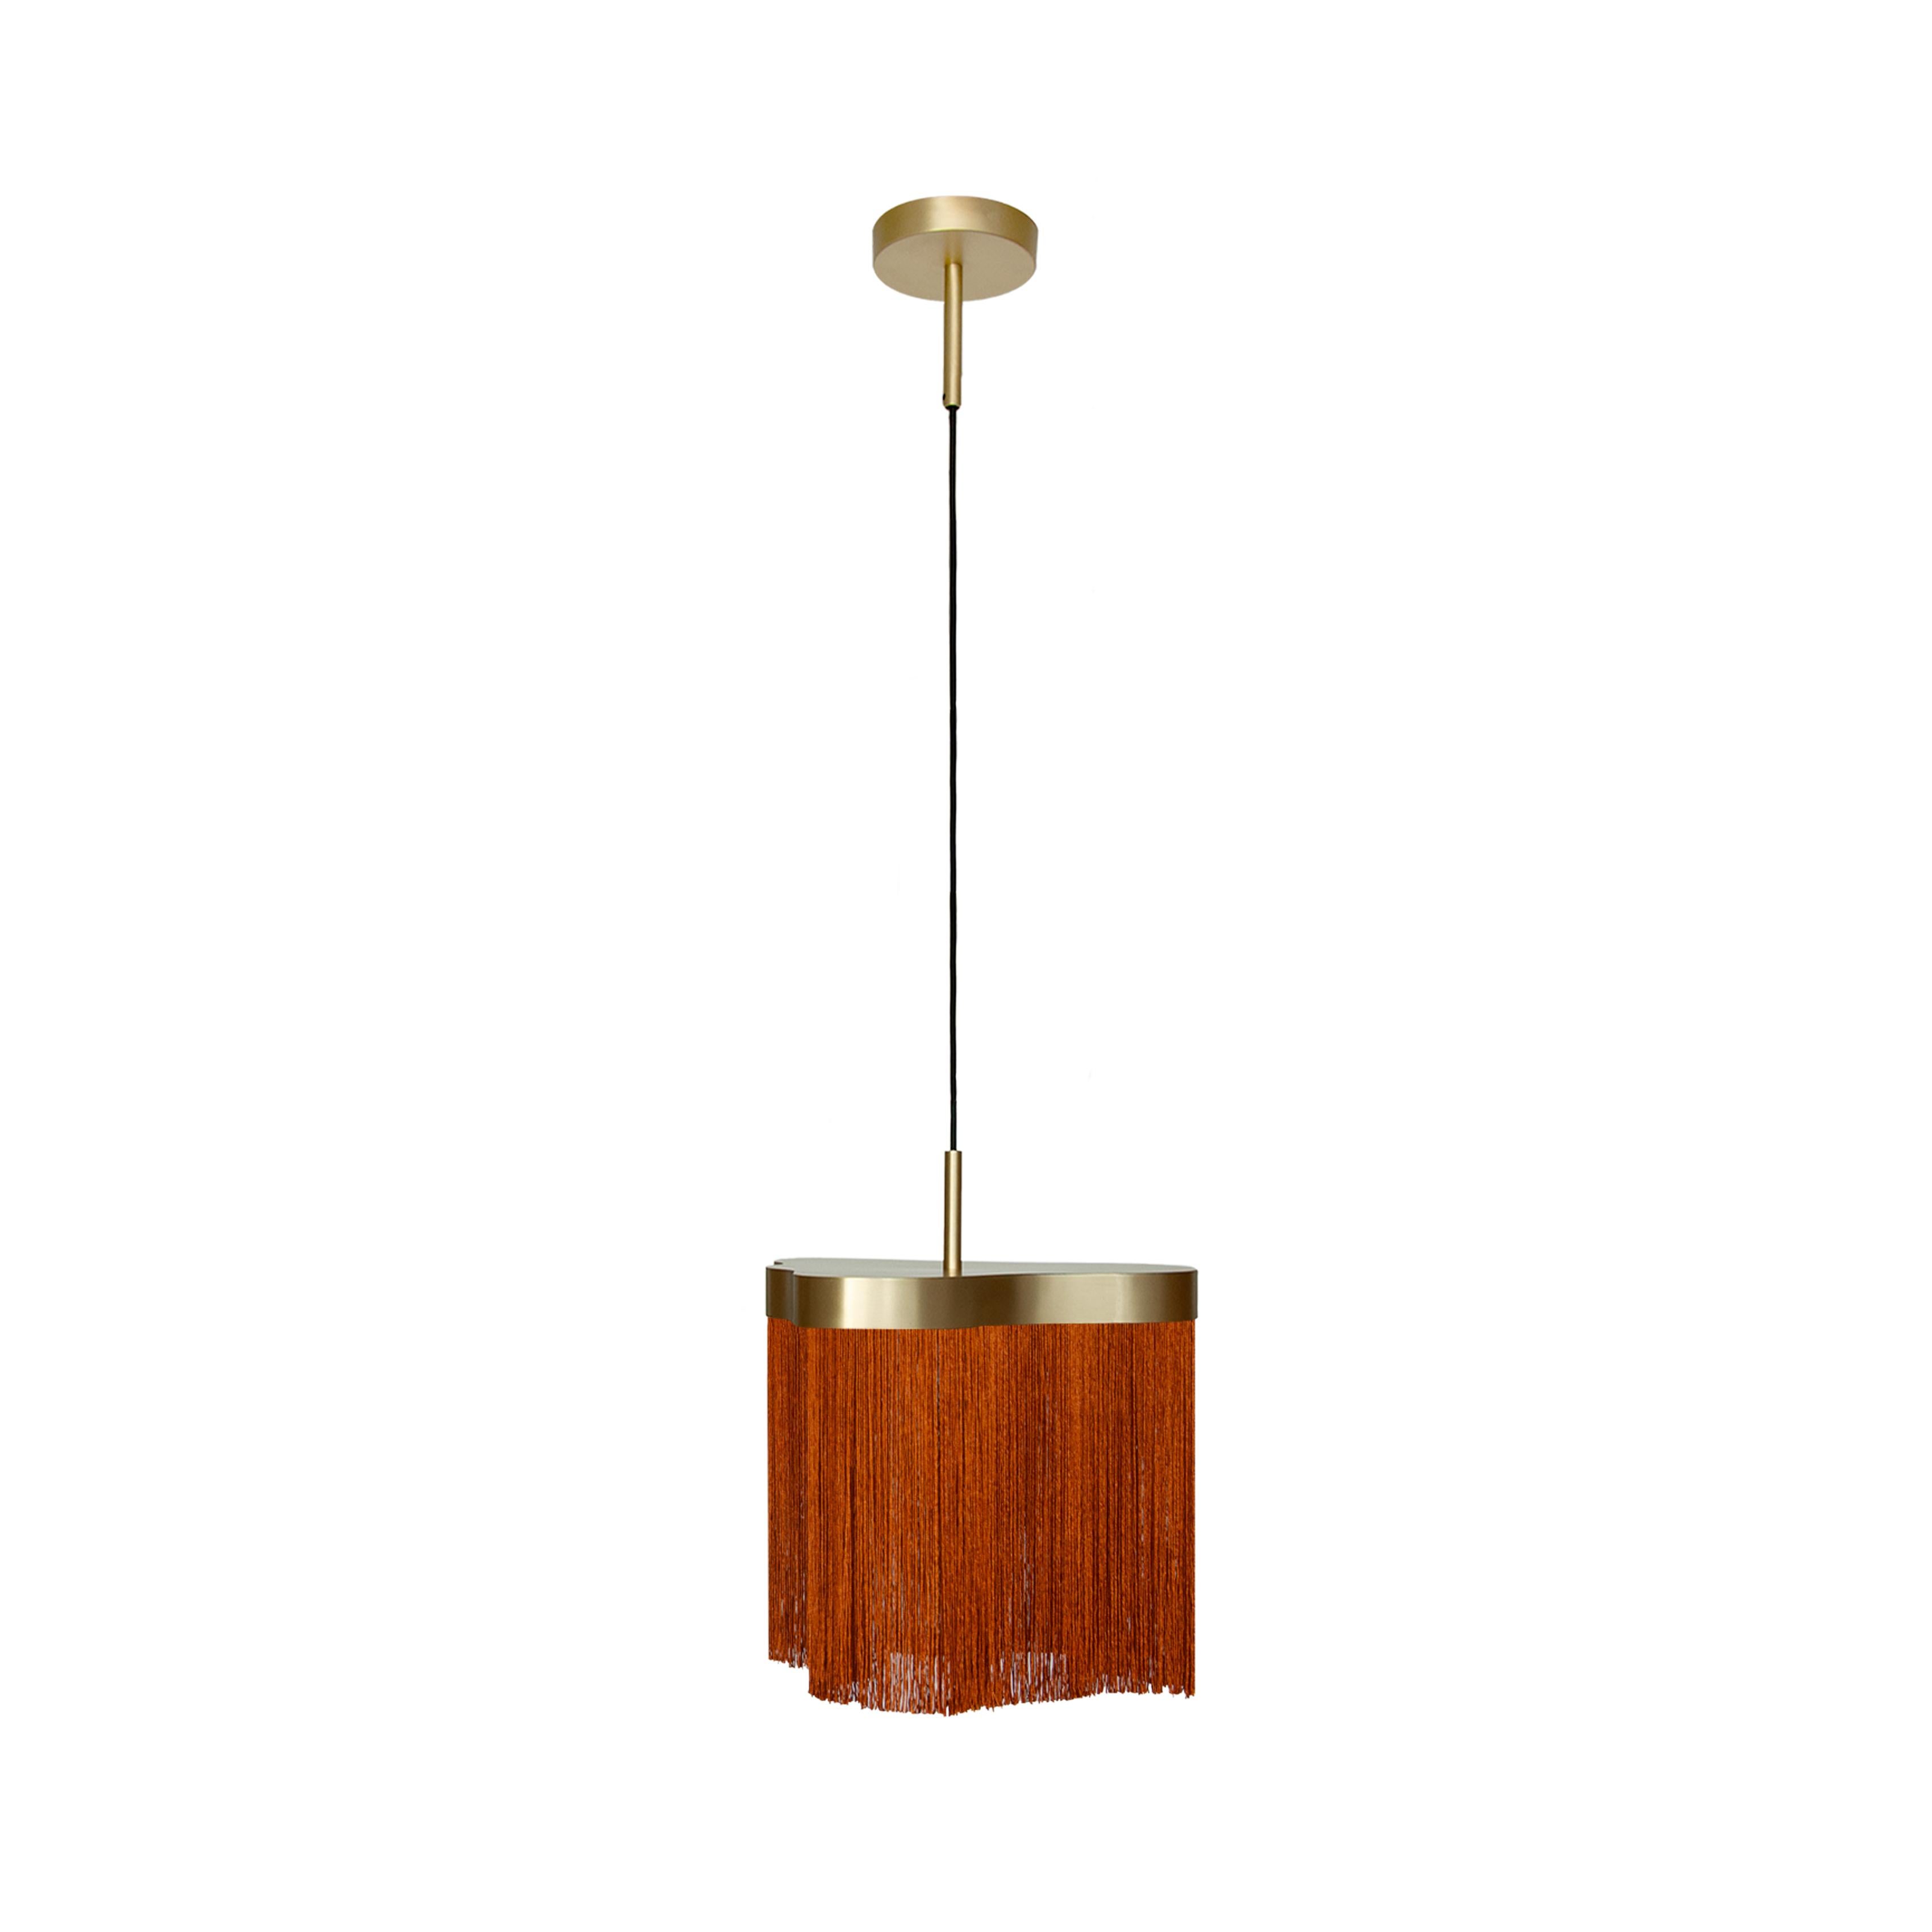 Arcipelago Minorca Dimmable Suspension Lamp in Satin Brass with Fireproof Rust For Sale